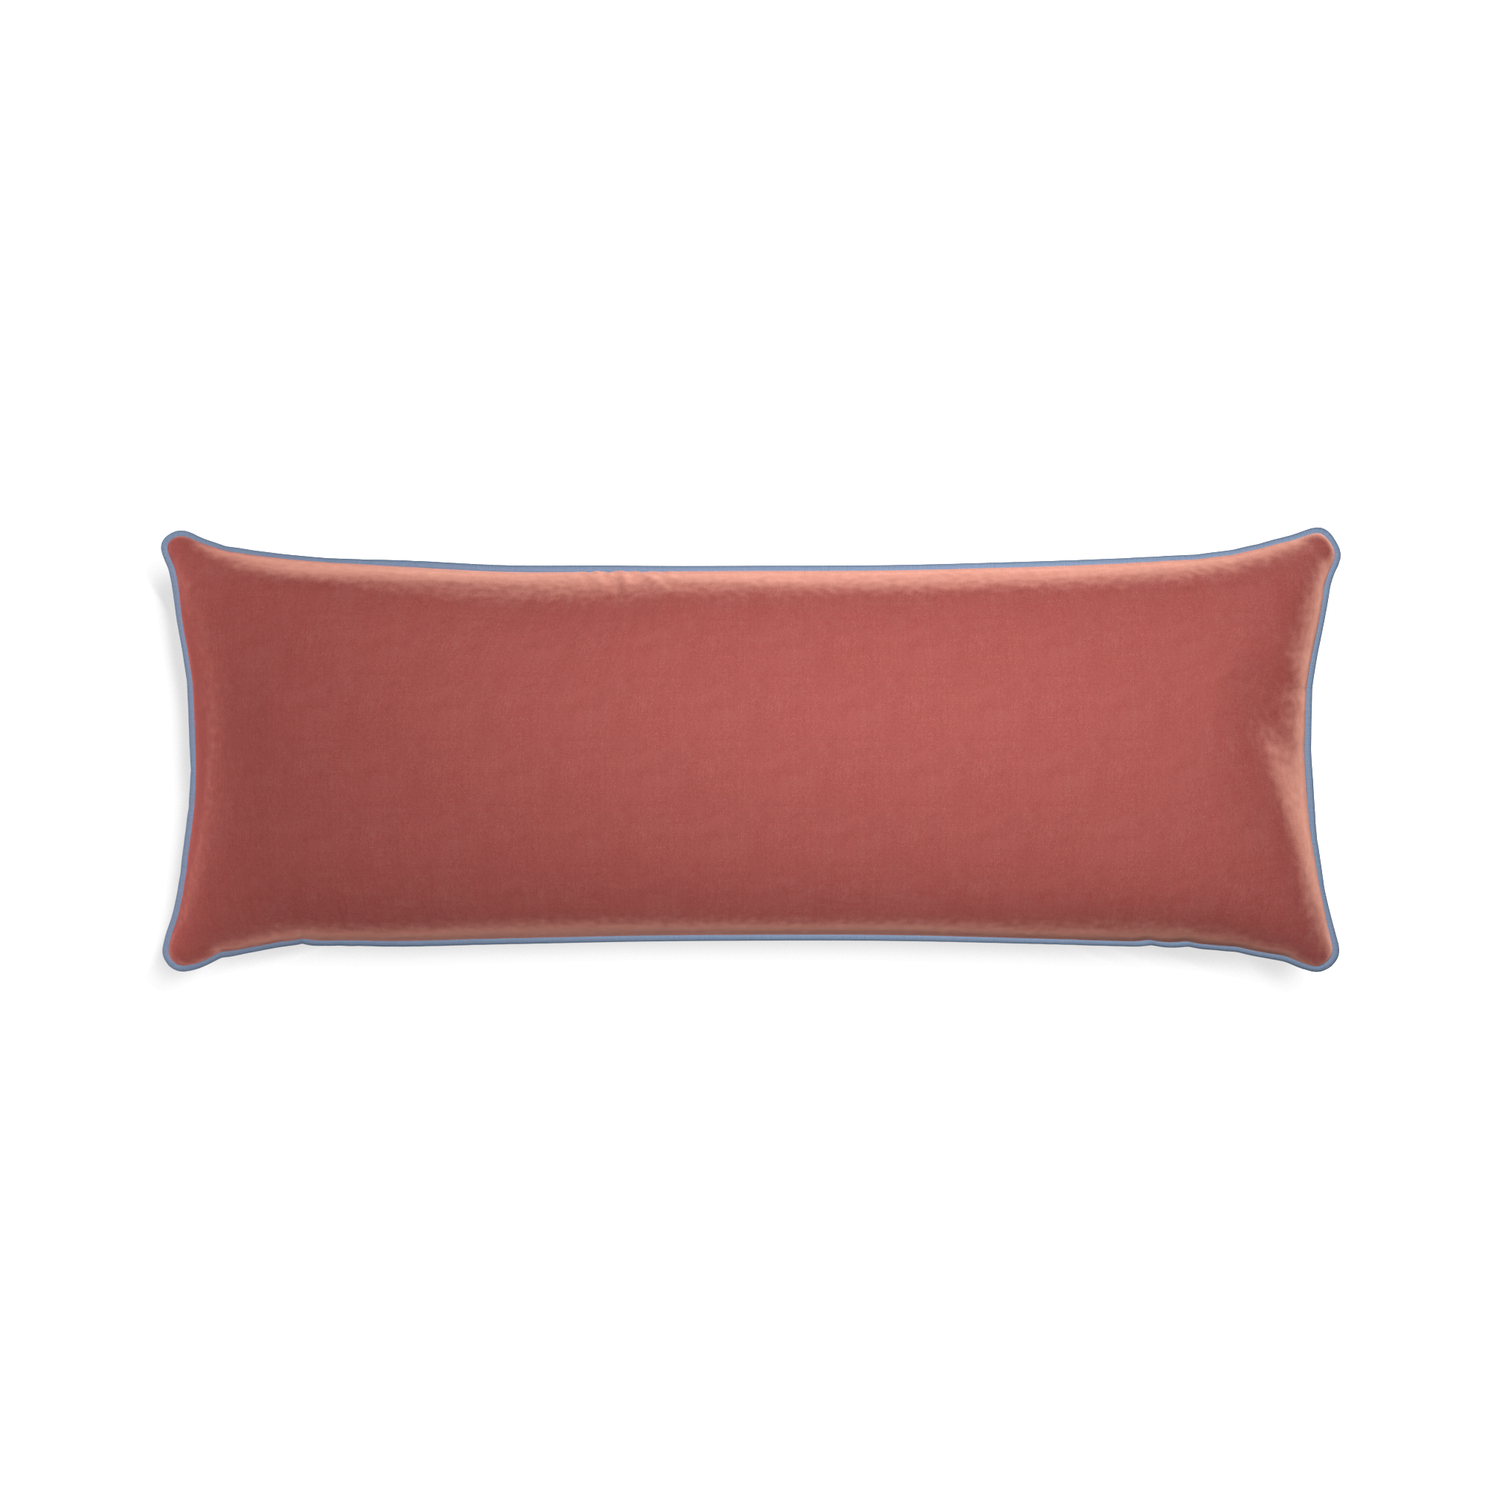 rectangle coral velvet pillow with sky blue piping